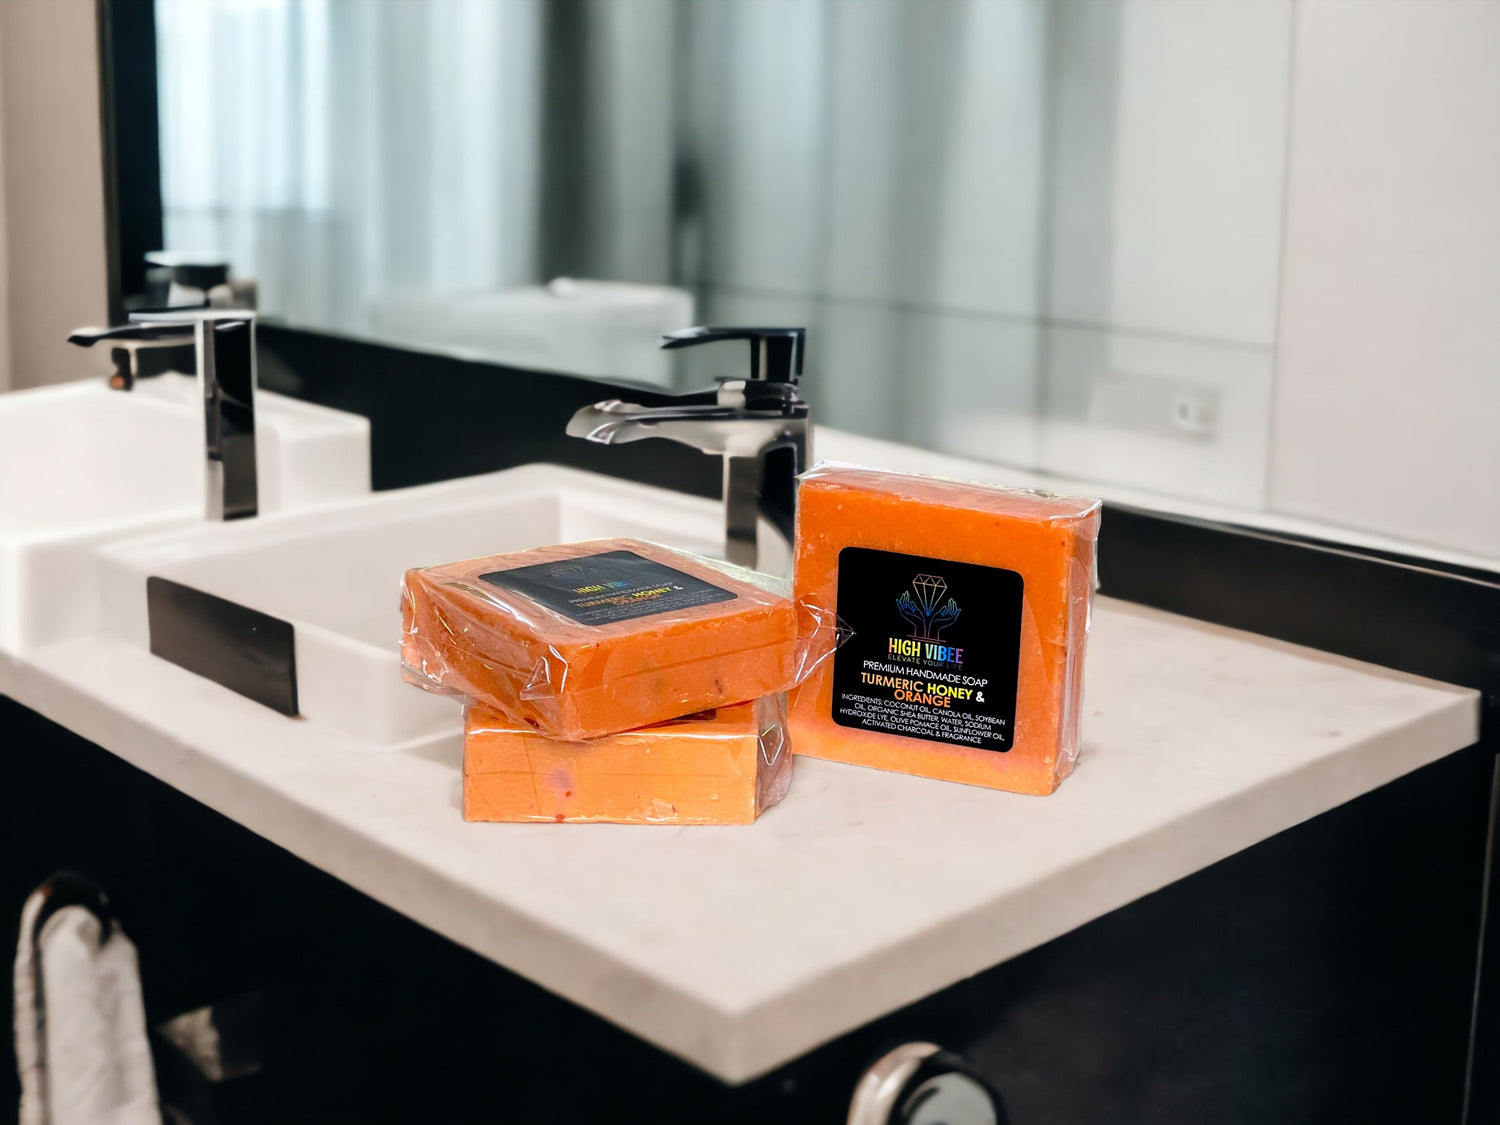  In the photo, there is the “Turmeric, Honey & Orange” High Vibee Soap. The soap is an orange color with hints of yellow. The photo shows three of these soaps on top of a cloth on a beautiful bathroom counter.